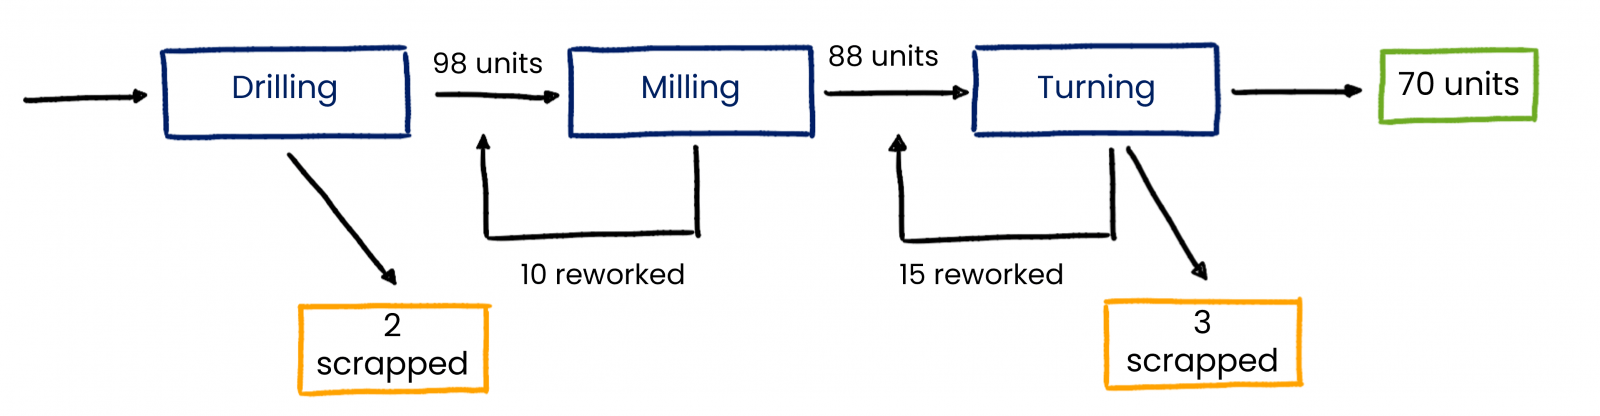 An example to calculate FPY, First Past Yield, when multiple processes are in a sequence.